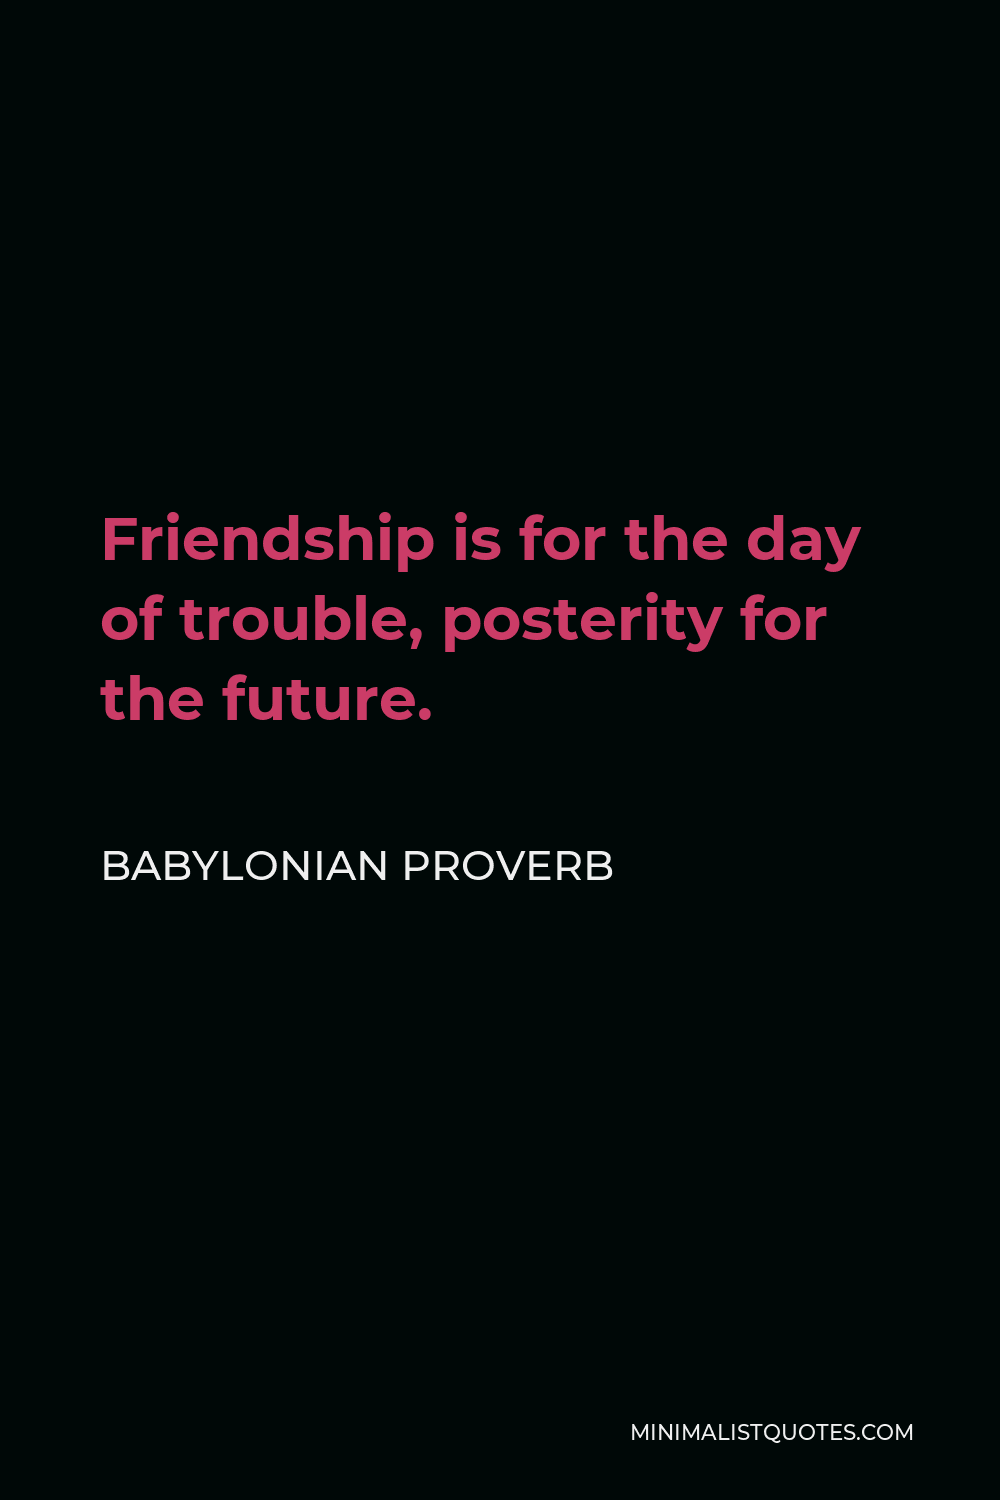 Babylonian Proverb Quote - Friendship is for the day of trouble, posterity for the future.